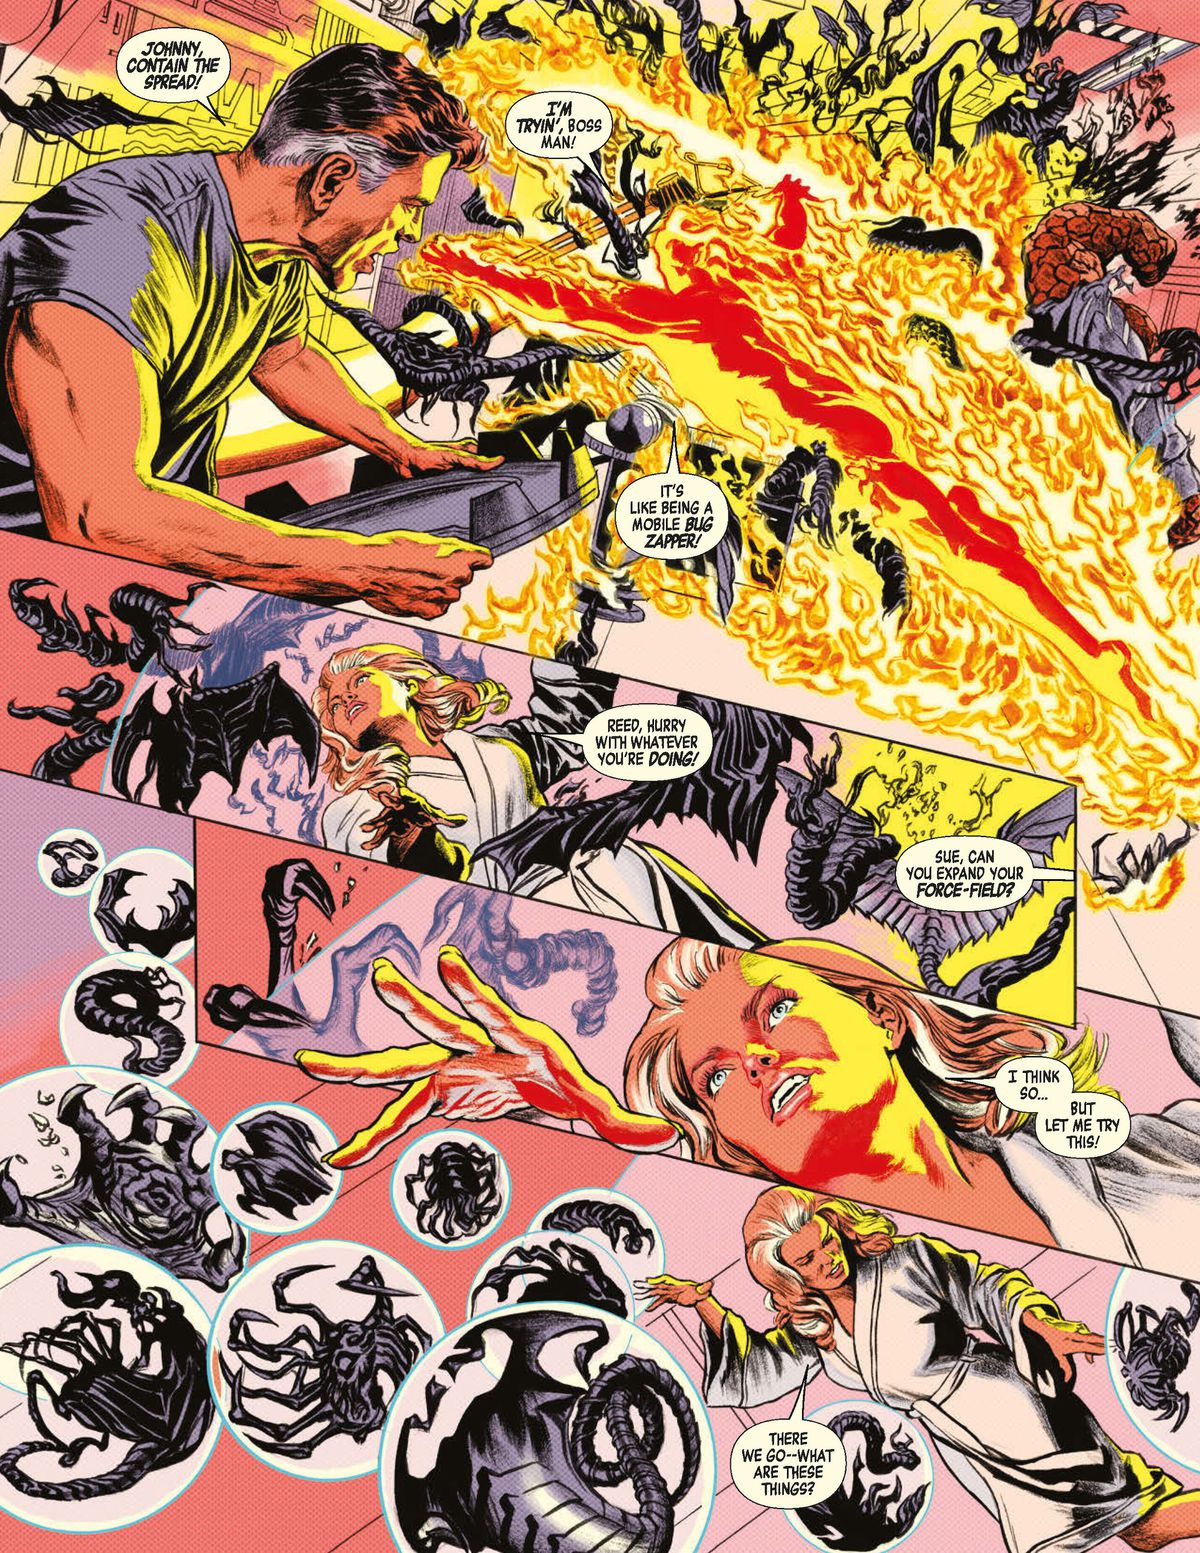 Human Torch, Reed, and Sue Storm try to stop the monsters with their powers